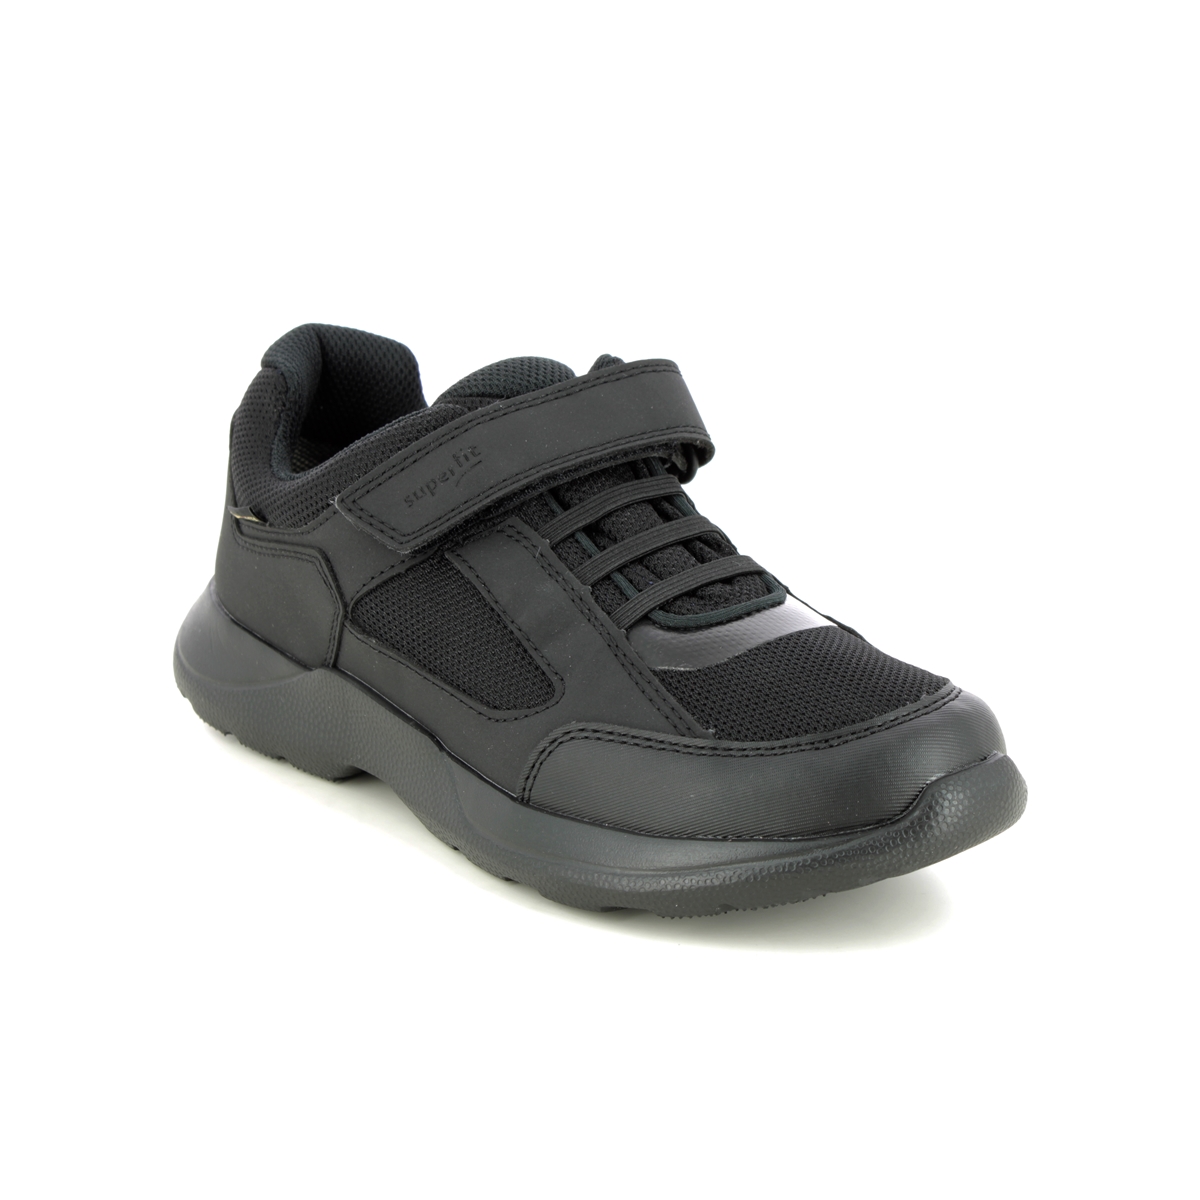 Superfit Rush Gtx Bungee Black Kids trainers 1006223-0000 in a Plain Man-made in Size 32